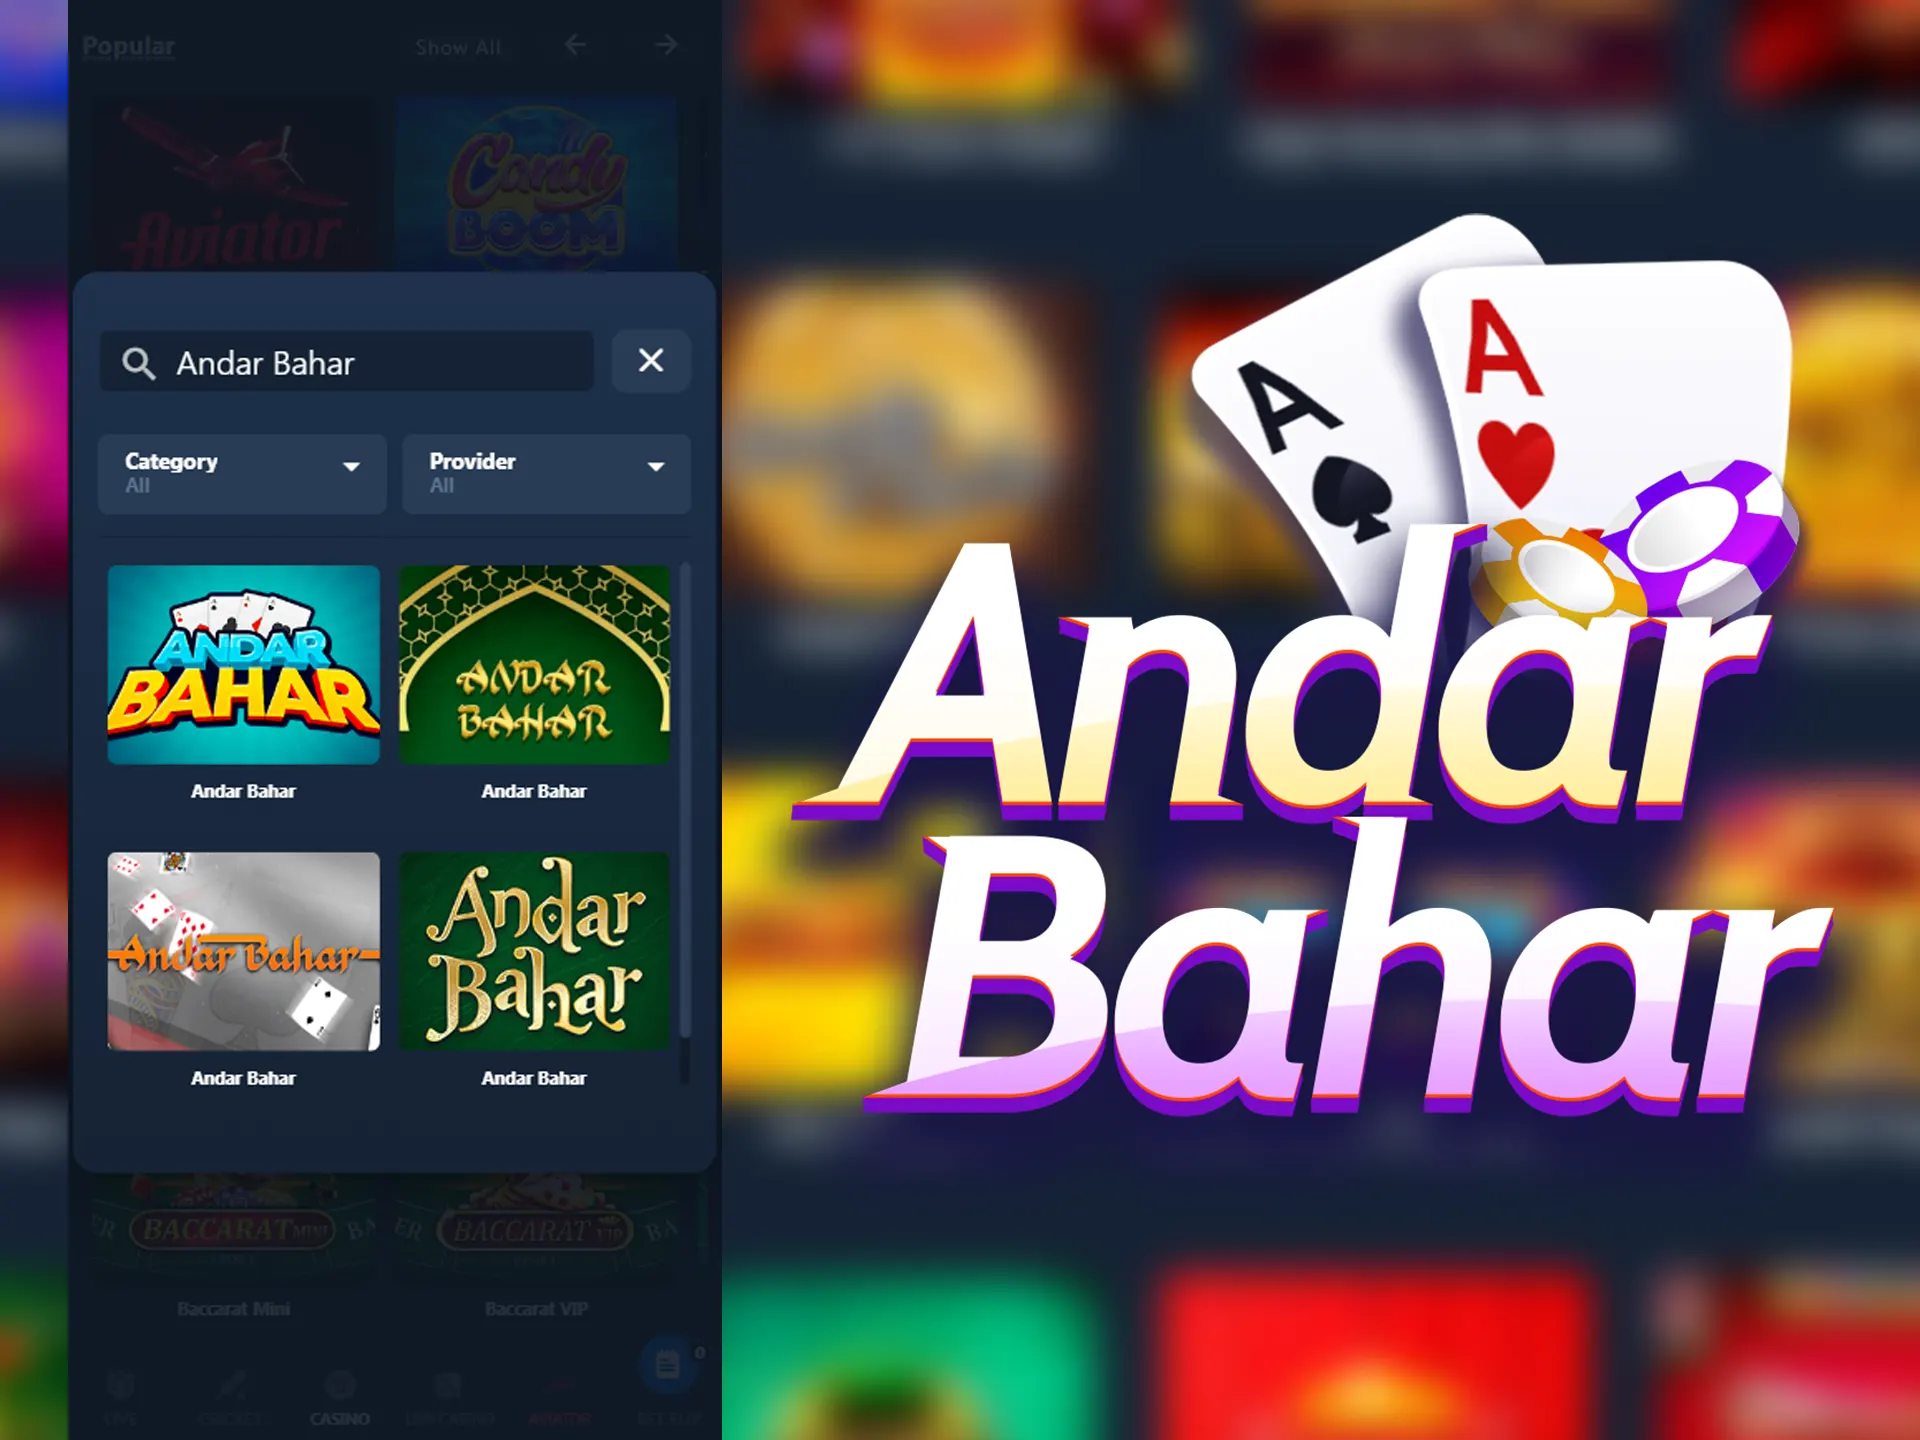 Andar Bahar is a great game to play and win money.